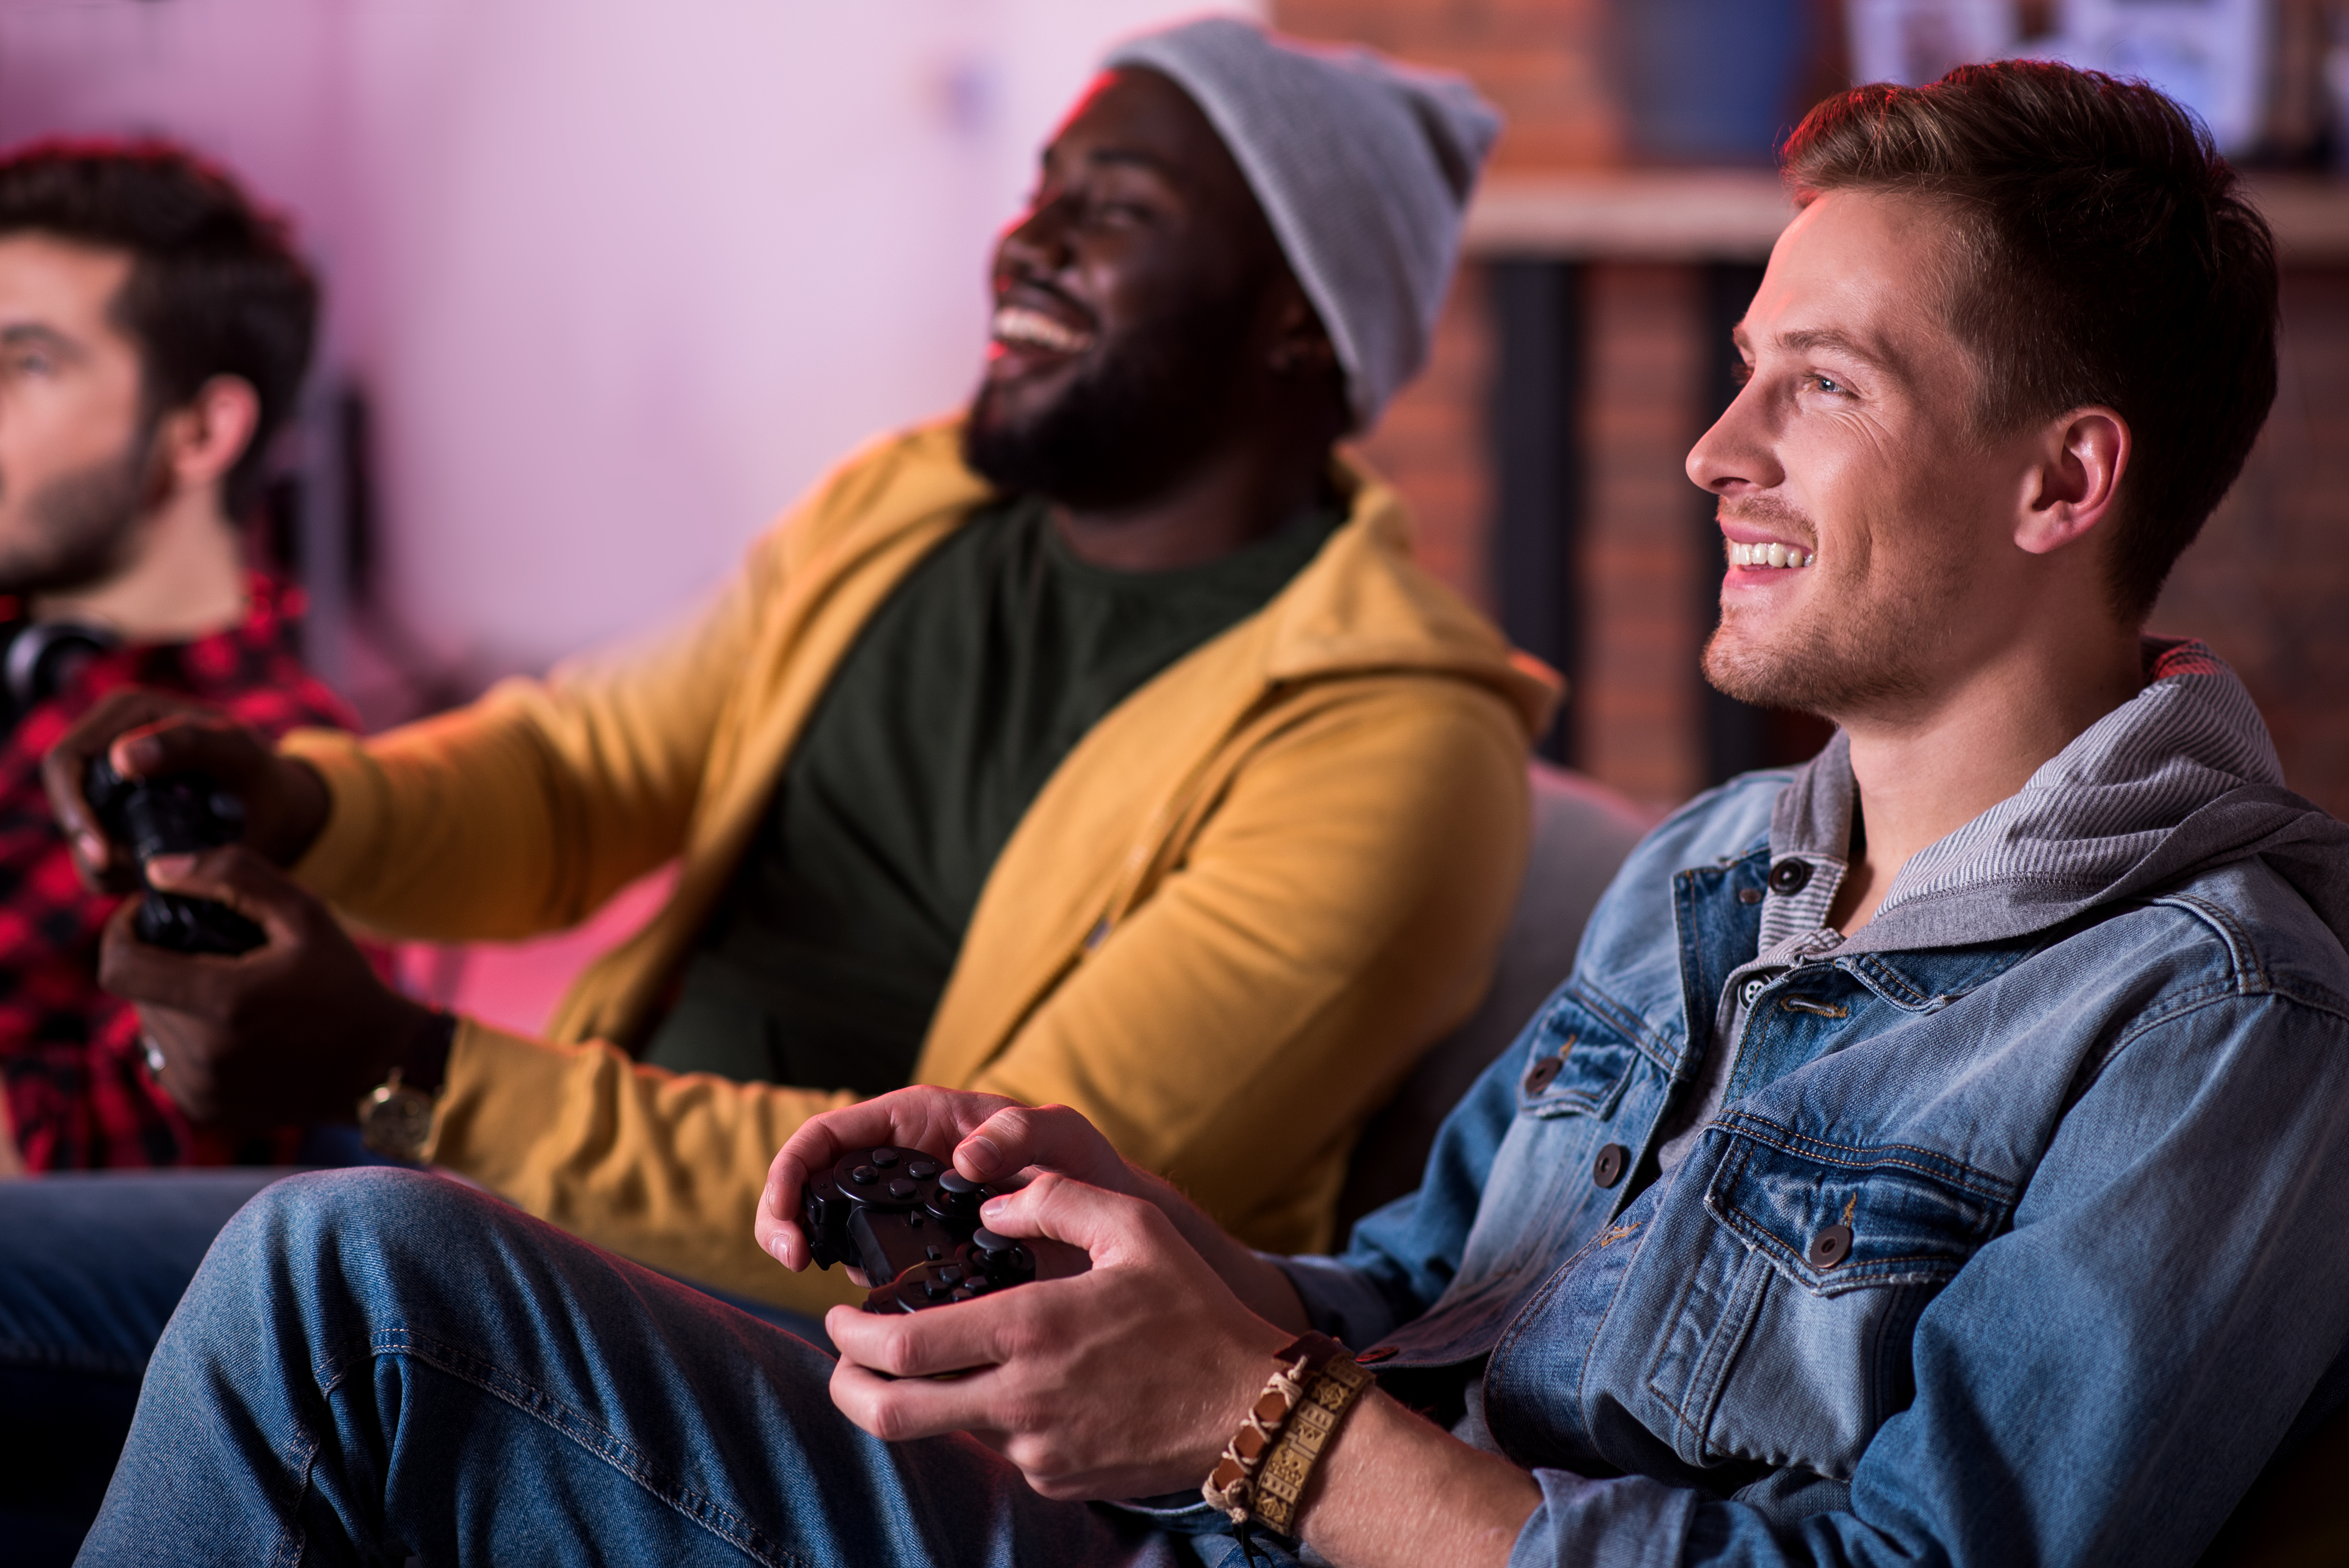 Two men in their twenties laughing and playing on a games console